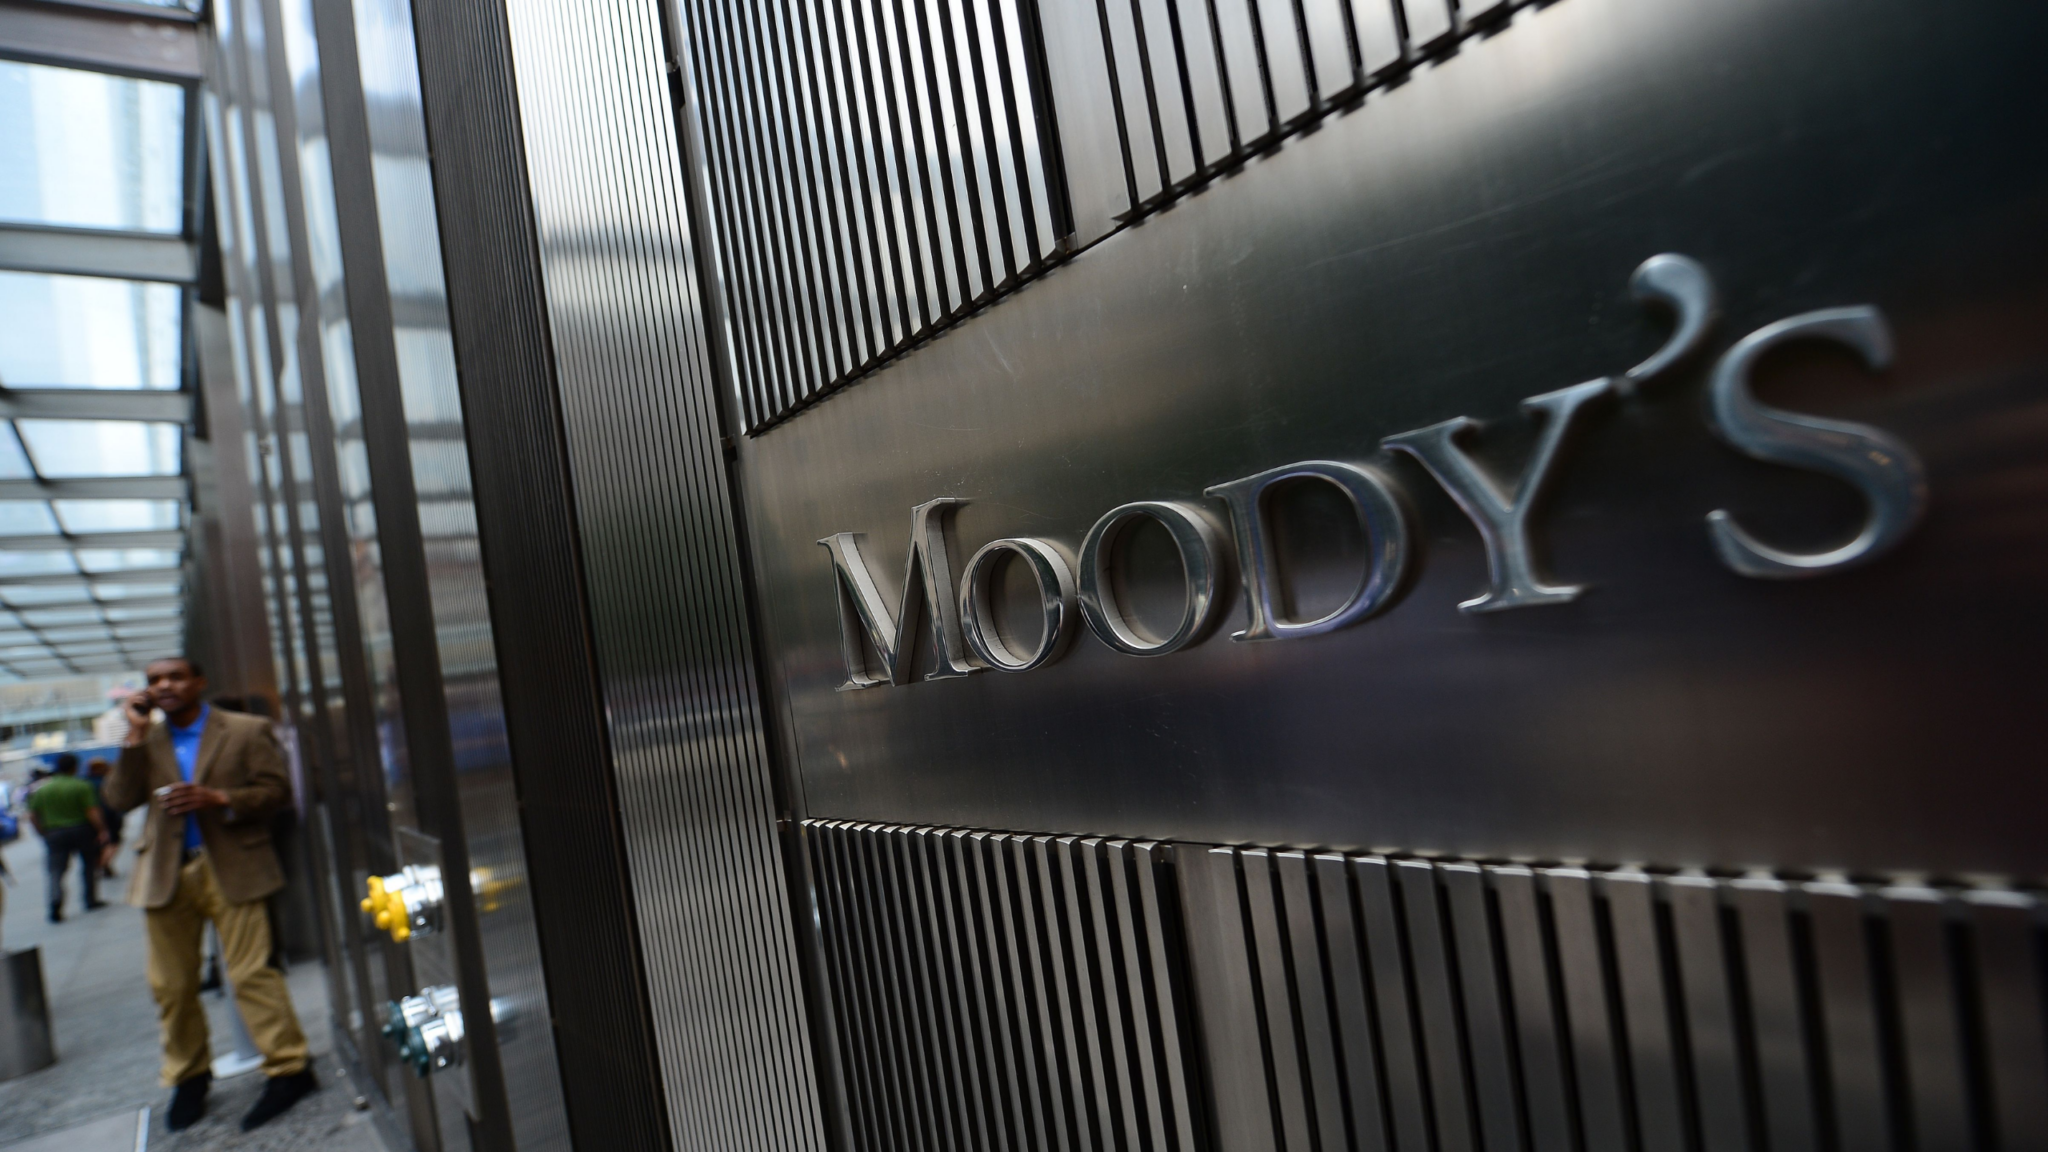 Moody’s AI Analytics For Stablecoin Stability Prediction